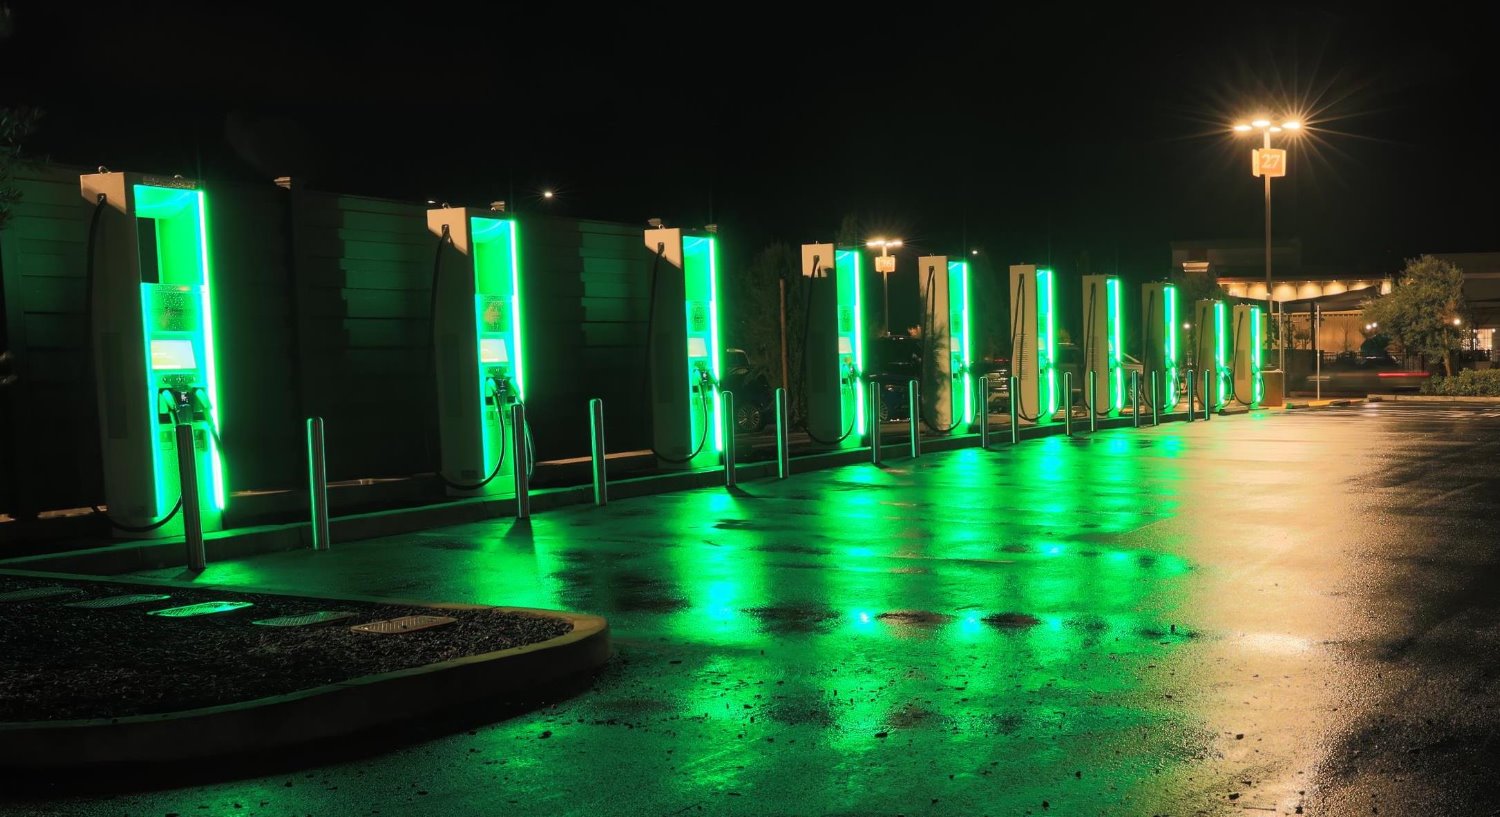 Electrify America chargers at night